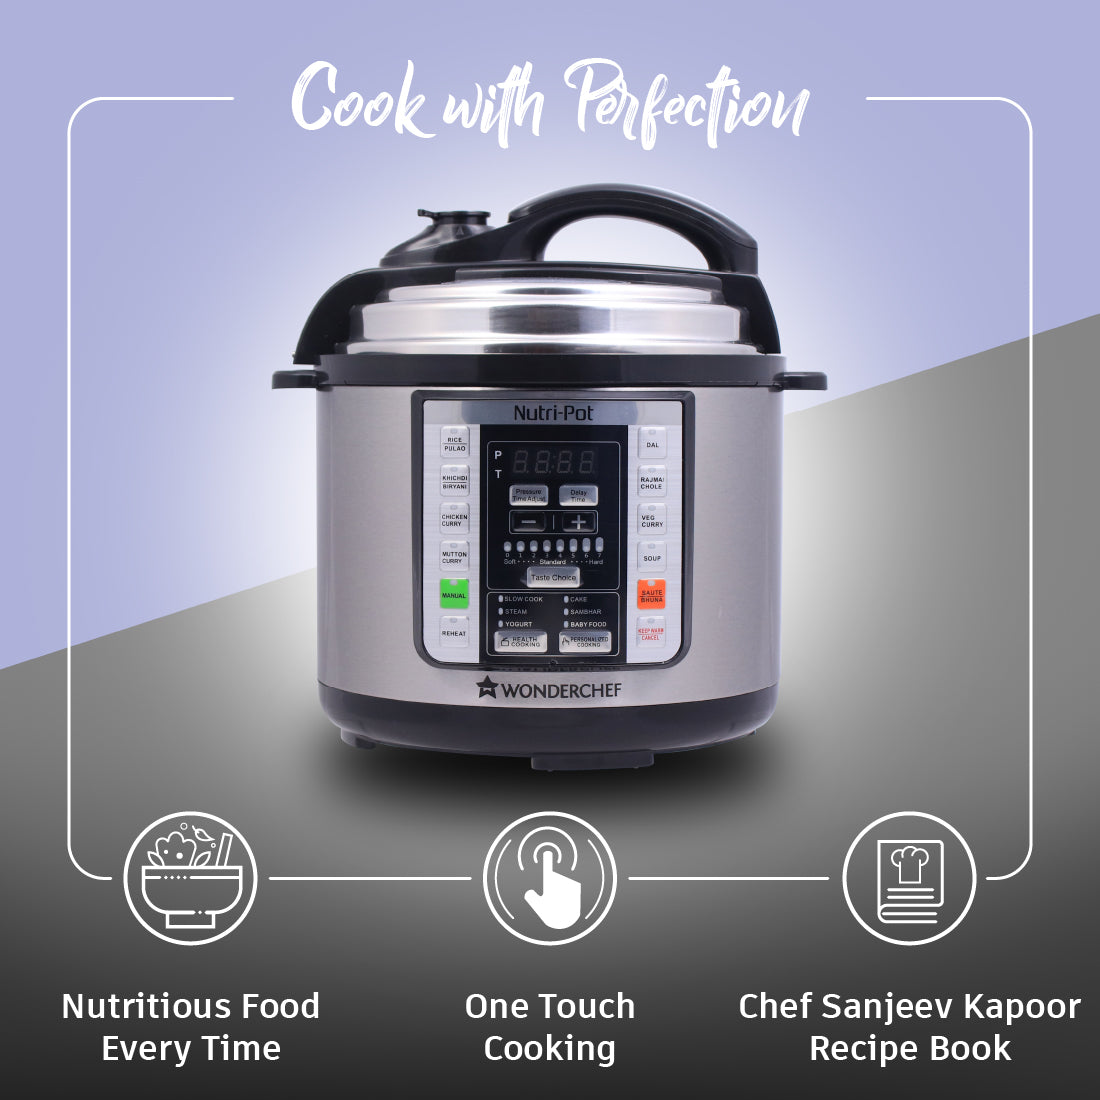 Wonderchef - Are you cooking under pressure? Let our Cooker build the  flavour! Cook, boil, sauté, bake, deep fry and steam with Wonderchef Power Pressure  Cooker Combo. To buy visit  #beautifulkitchen #